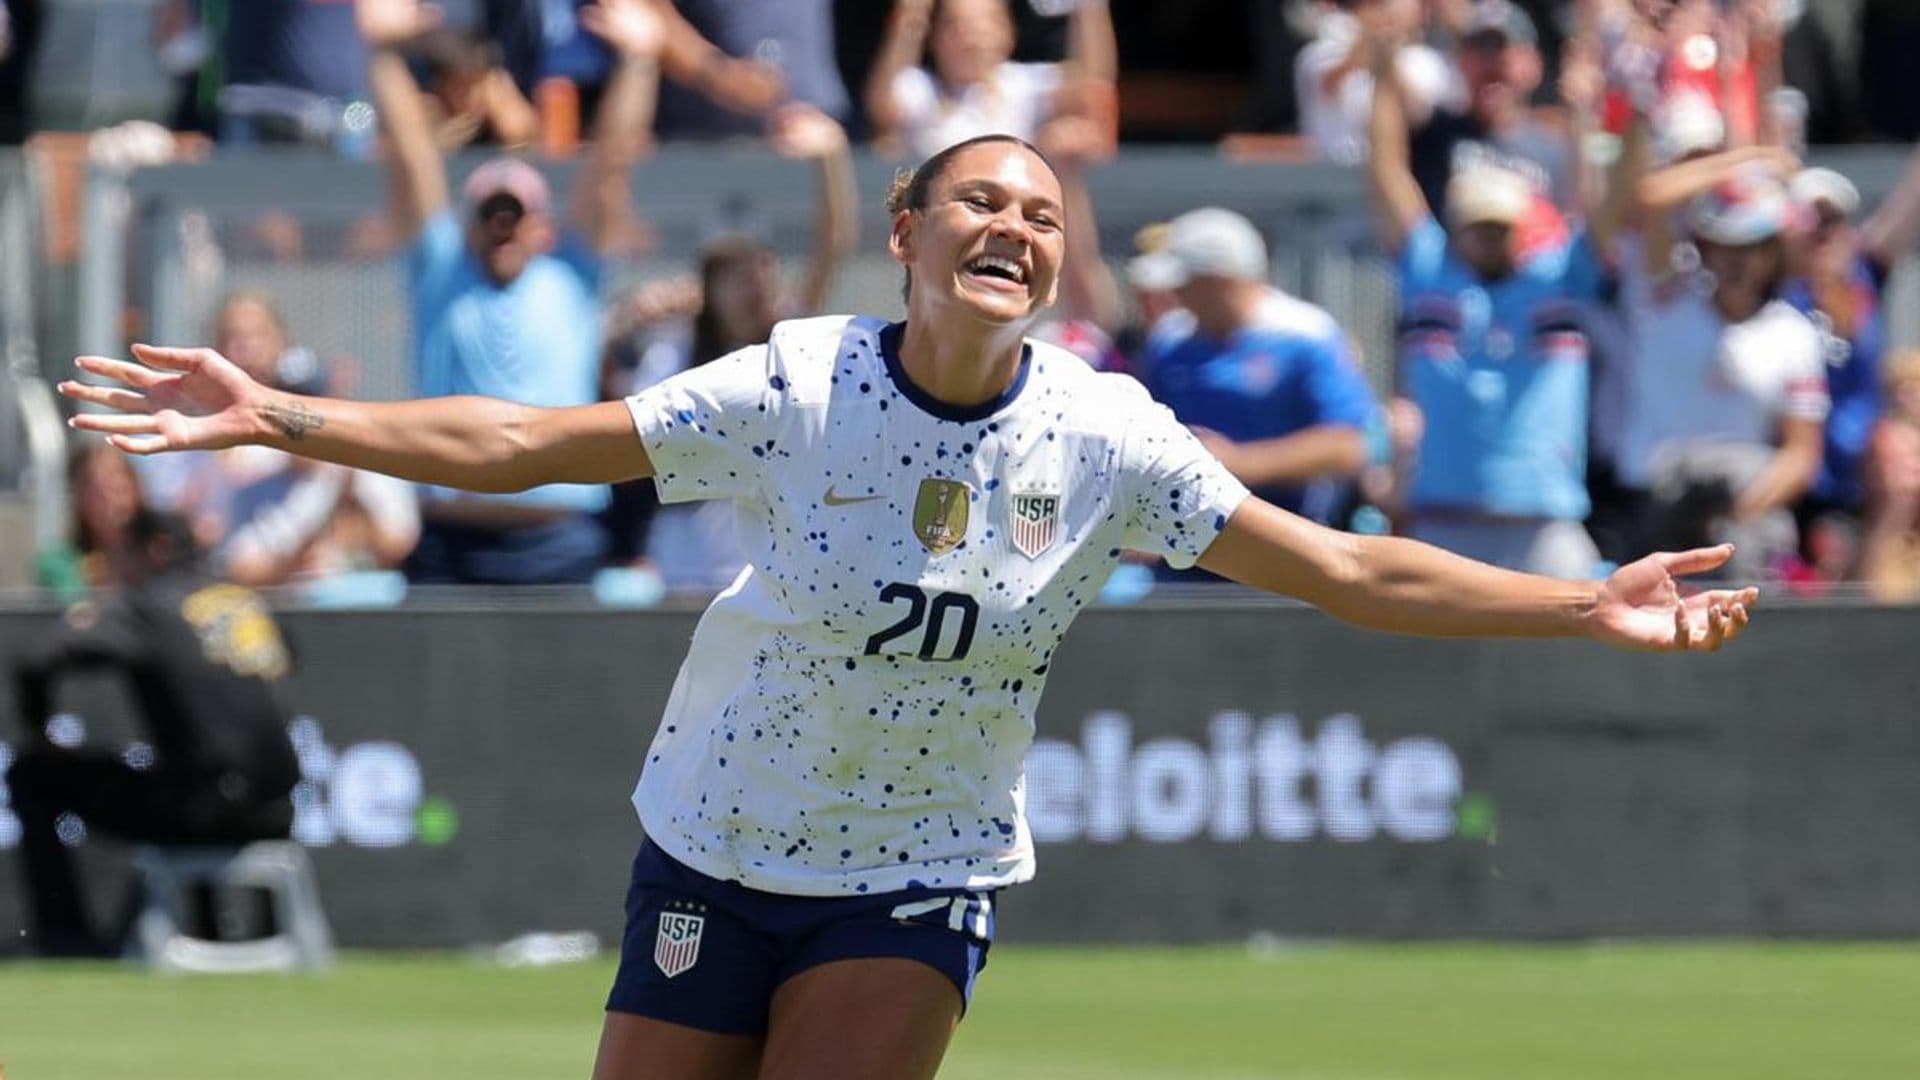 Trinity Rodman takes the U.S. women’s national team to victory in match against Wales